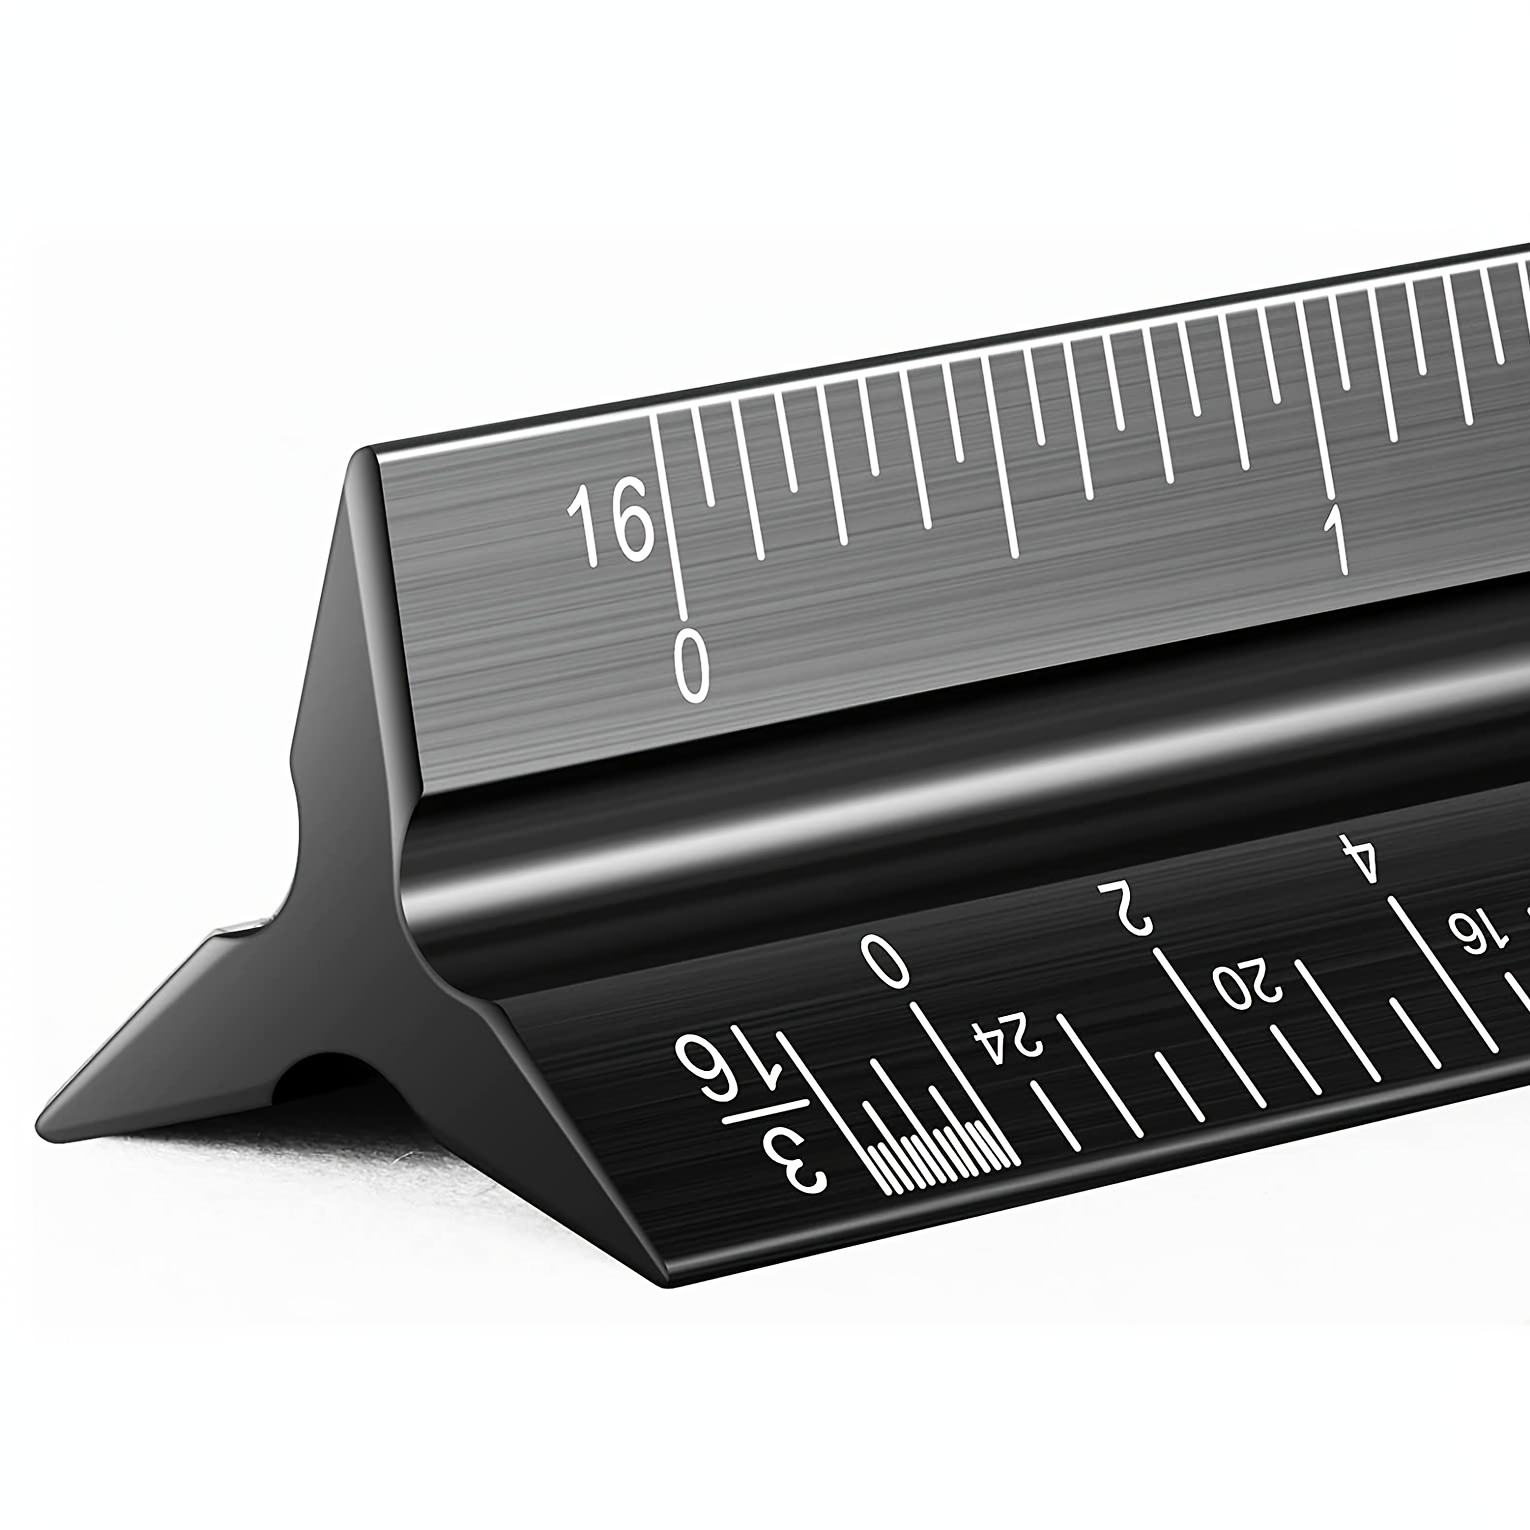 1pc Aluminum Alloy Triangular Ruler With Laser Engraved Scales,  Architectural Design Drafting Ruler For Construction, Home Decor And Diy  Projects In Inches/cm